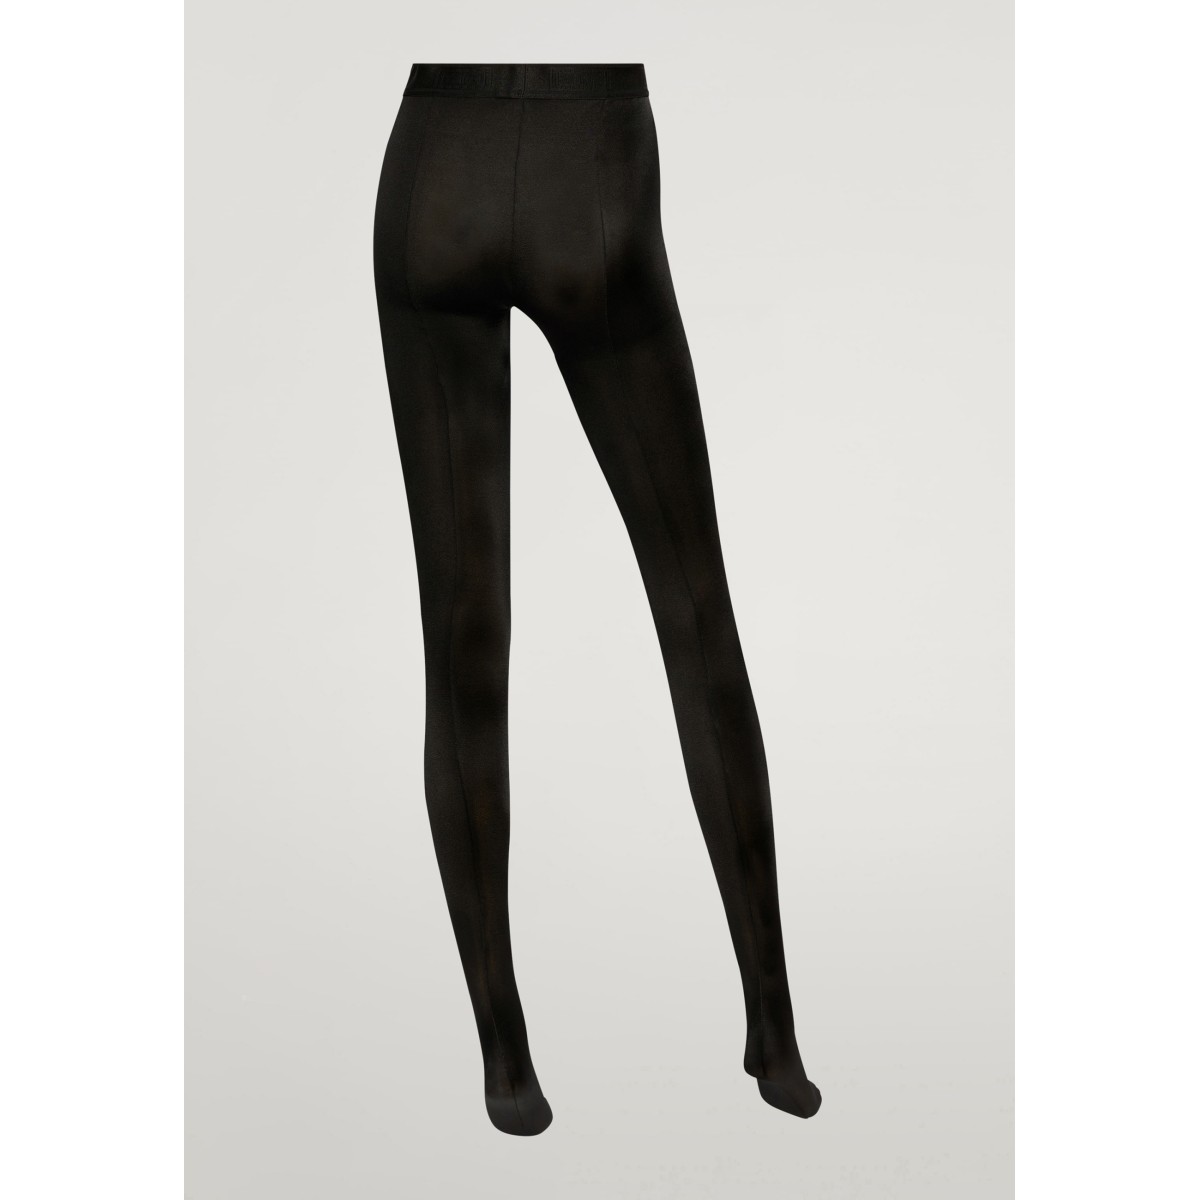 Wolford Satin de Luxe 100 tights in black - shoobaloo